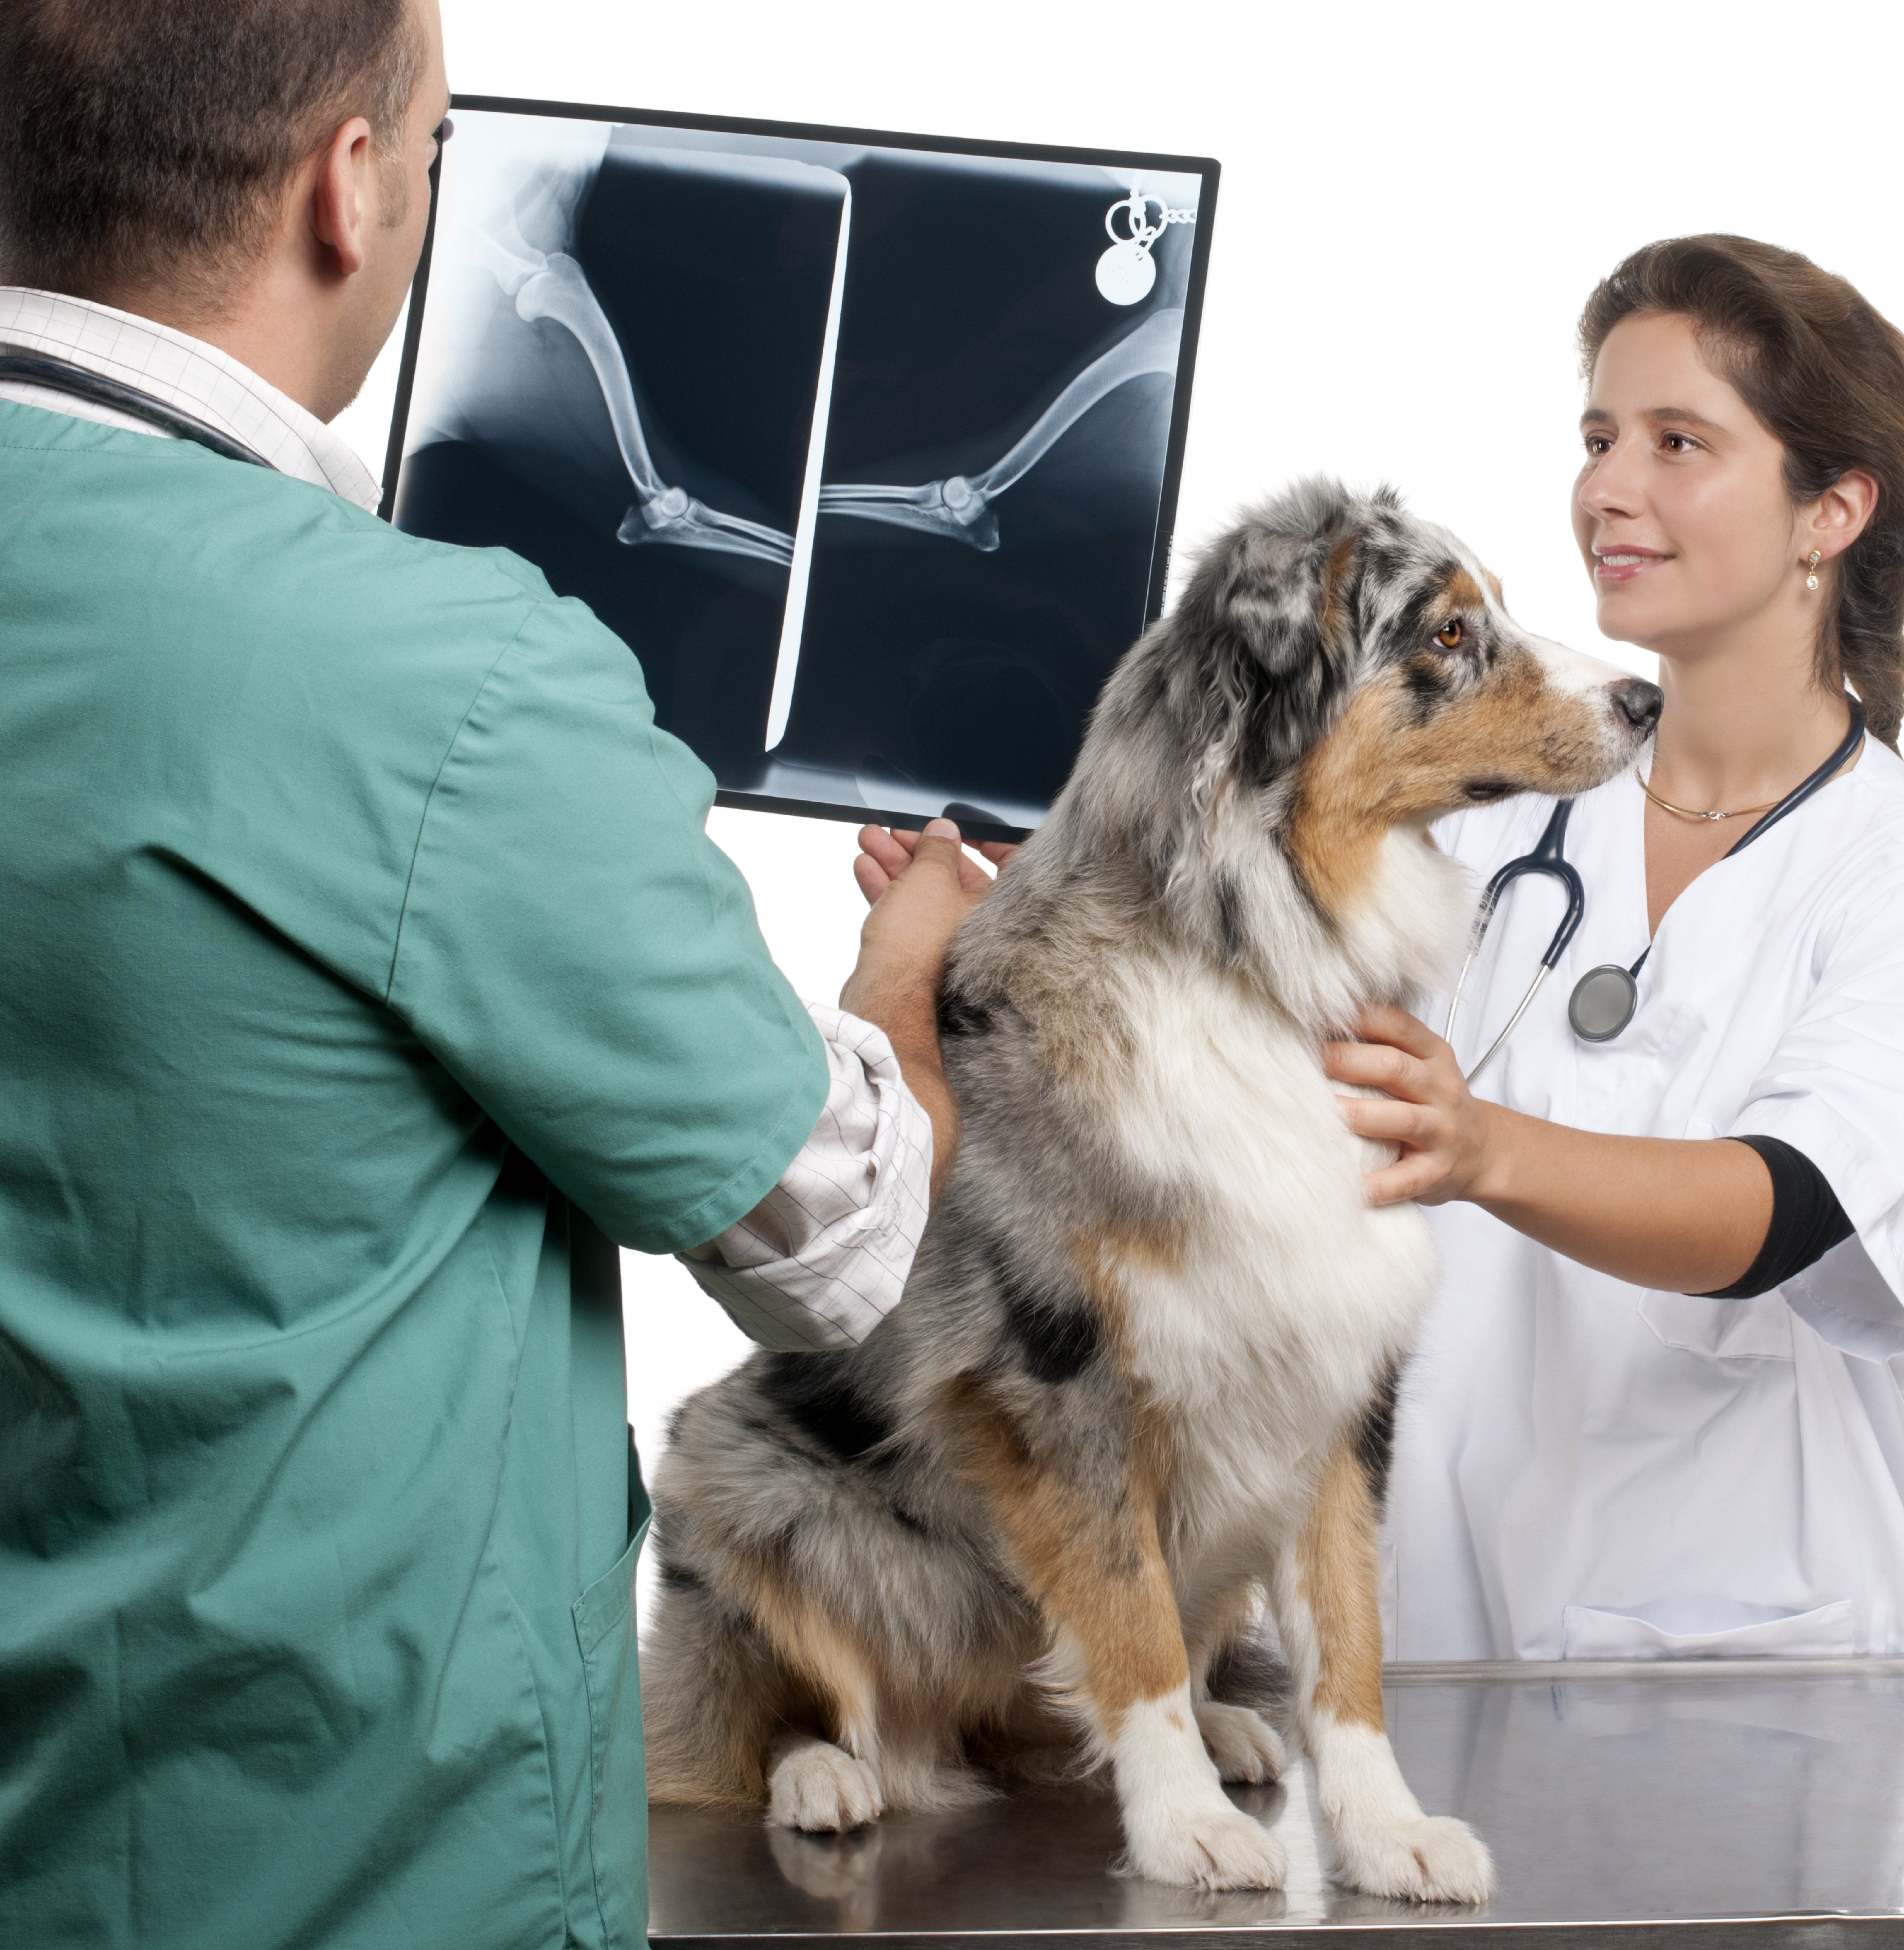 Ultrasound and X-rays: What Do Pet Scans Detect?